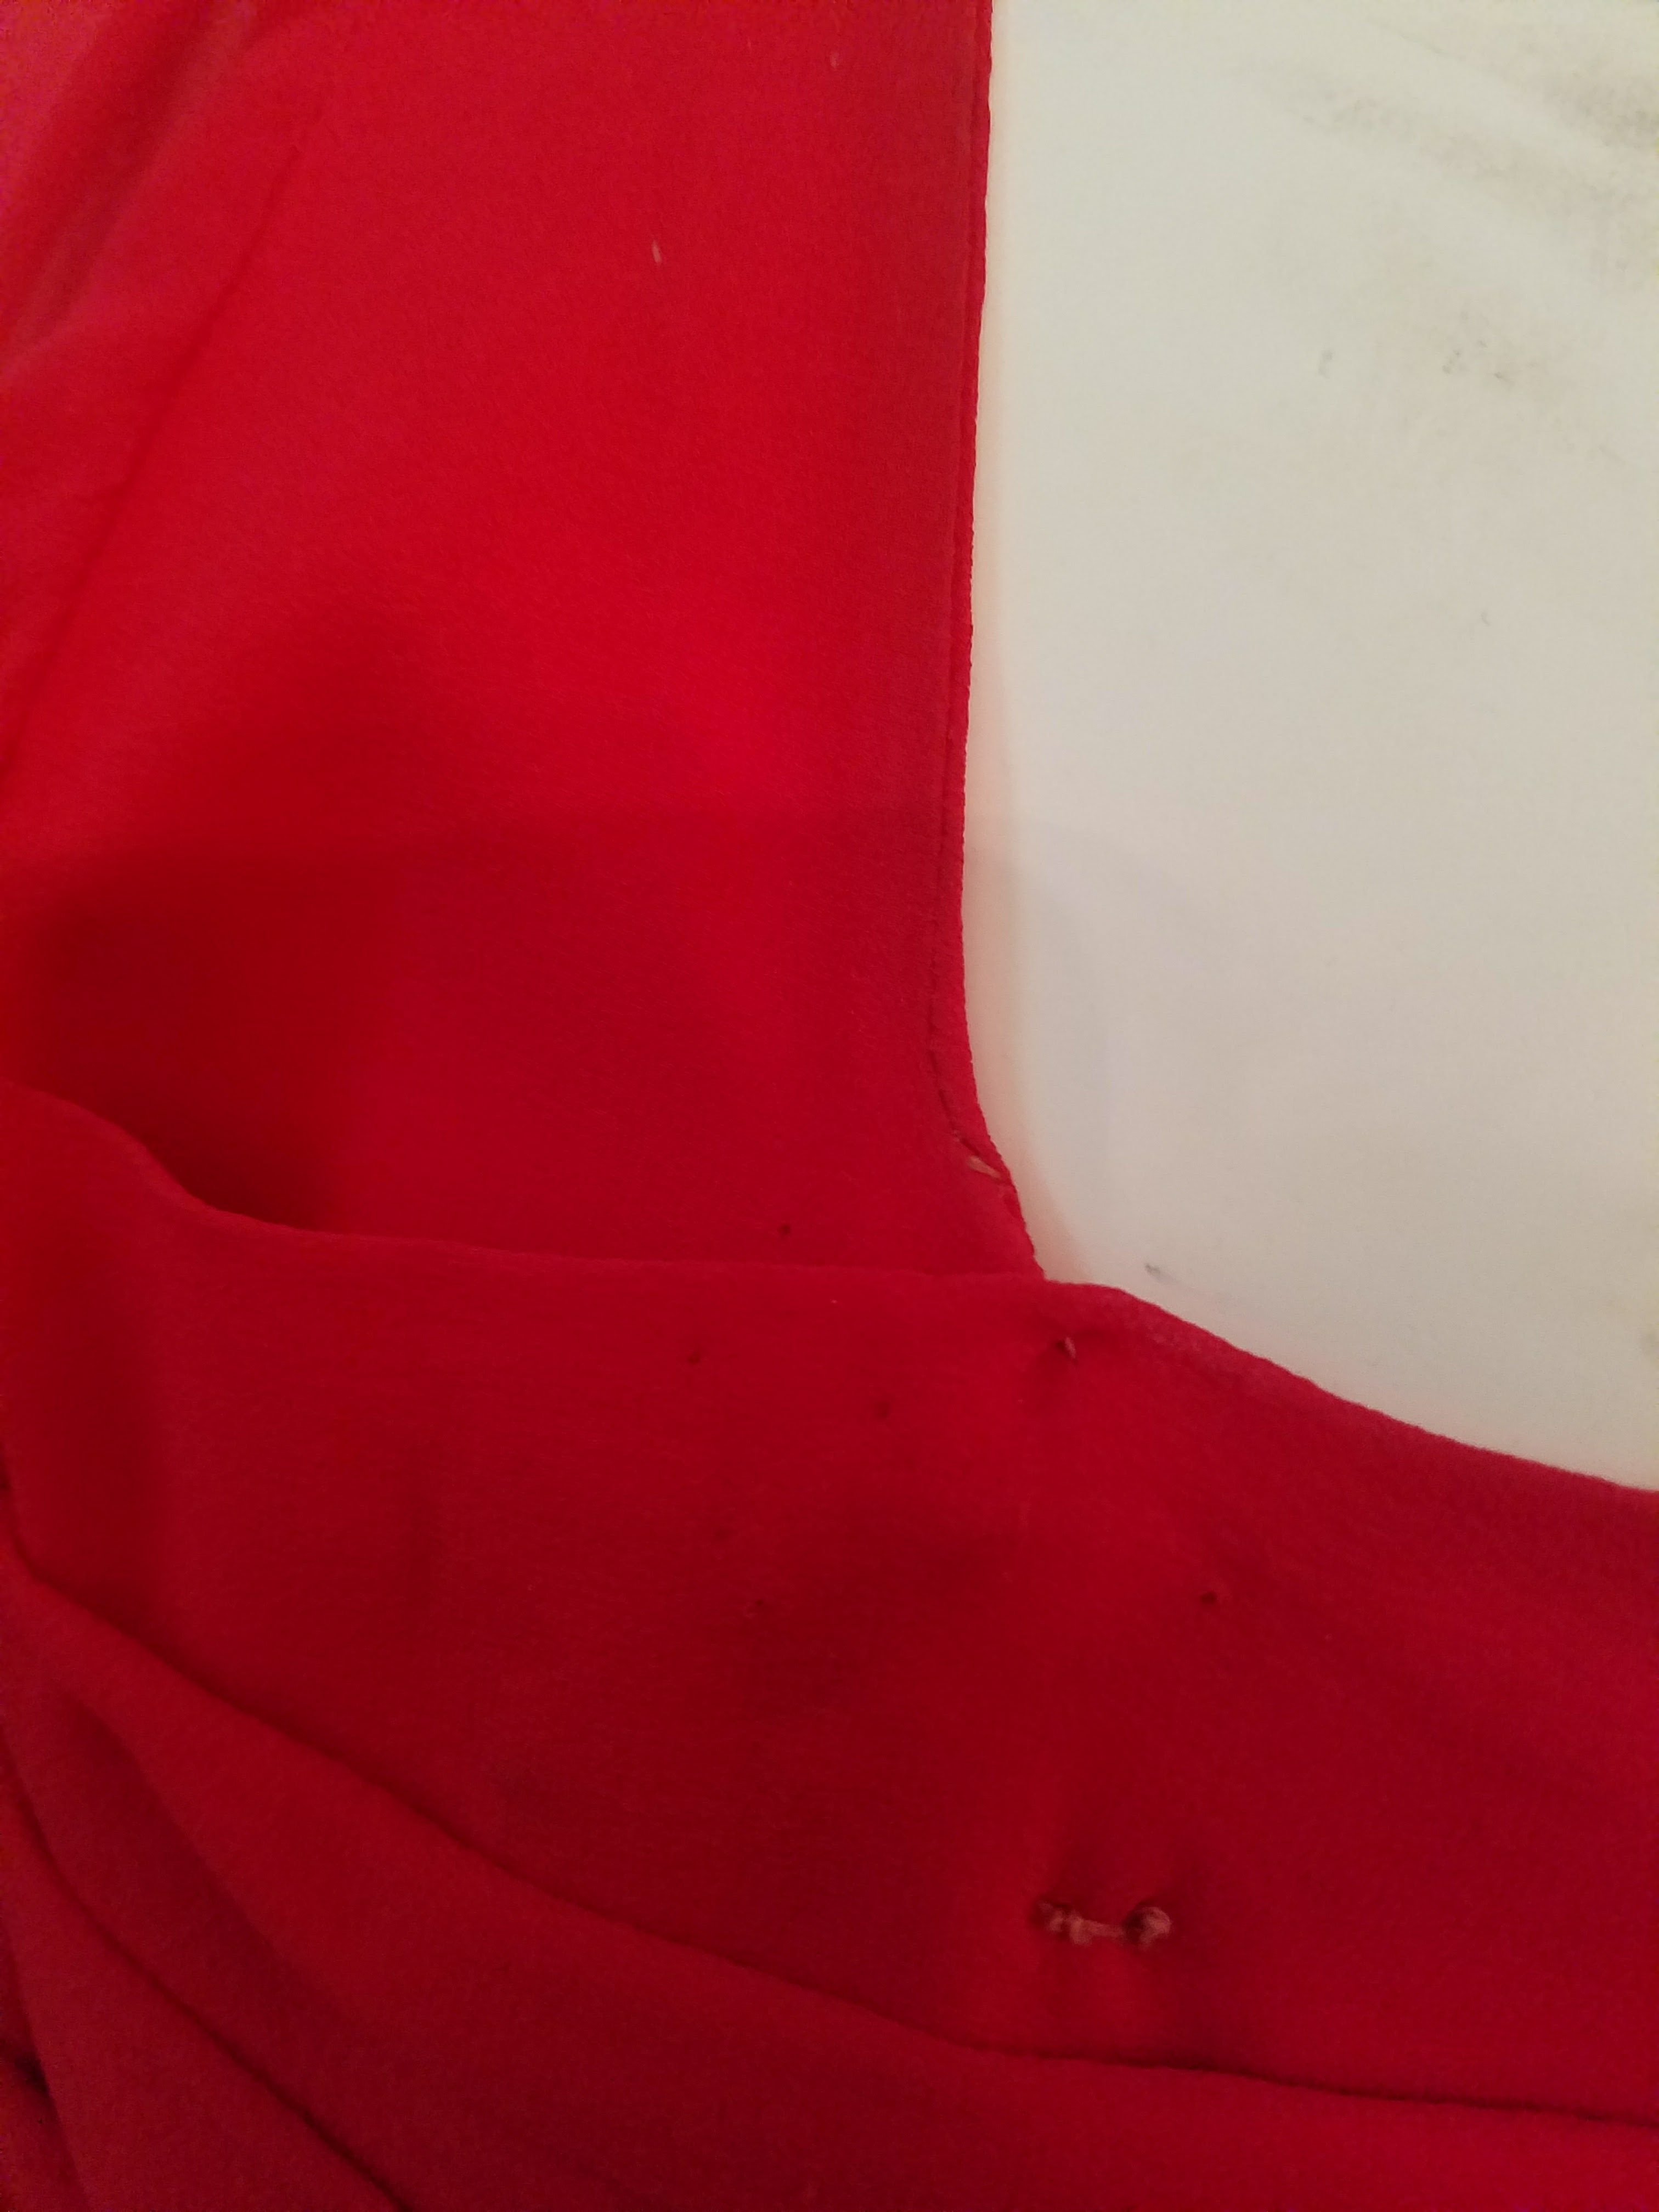 Vintage Here Comes My Man Red Dress – Aunt Gladys' Attic